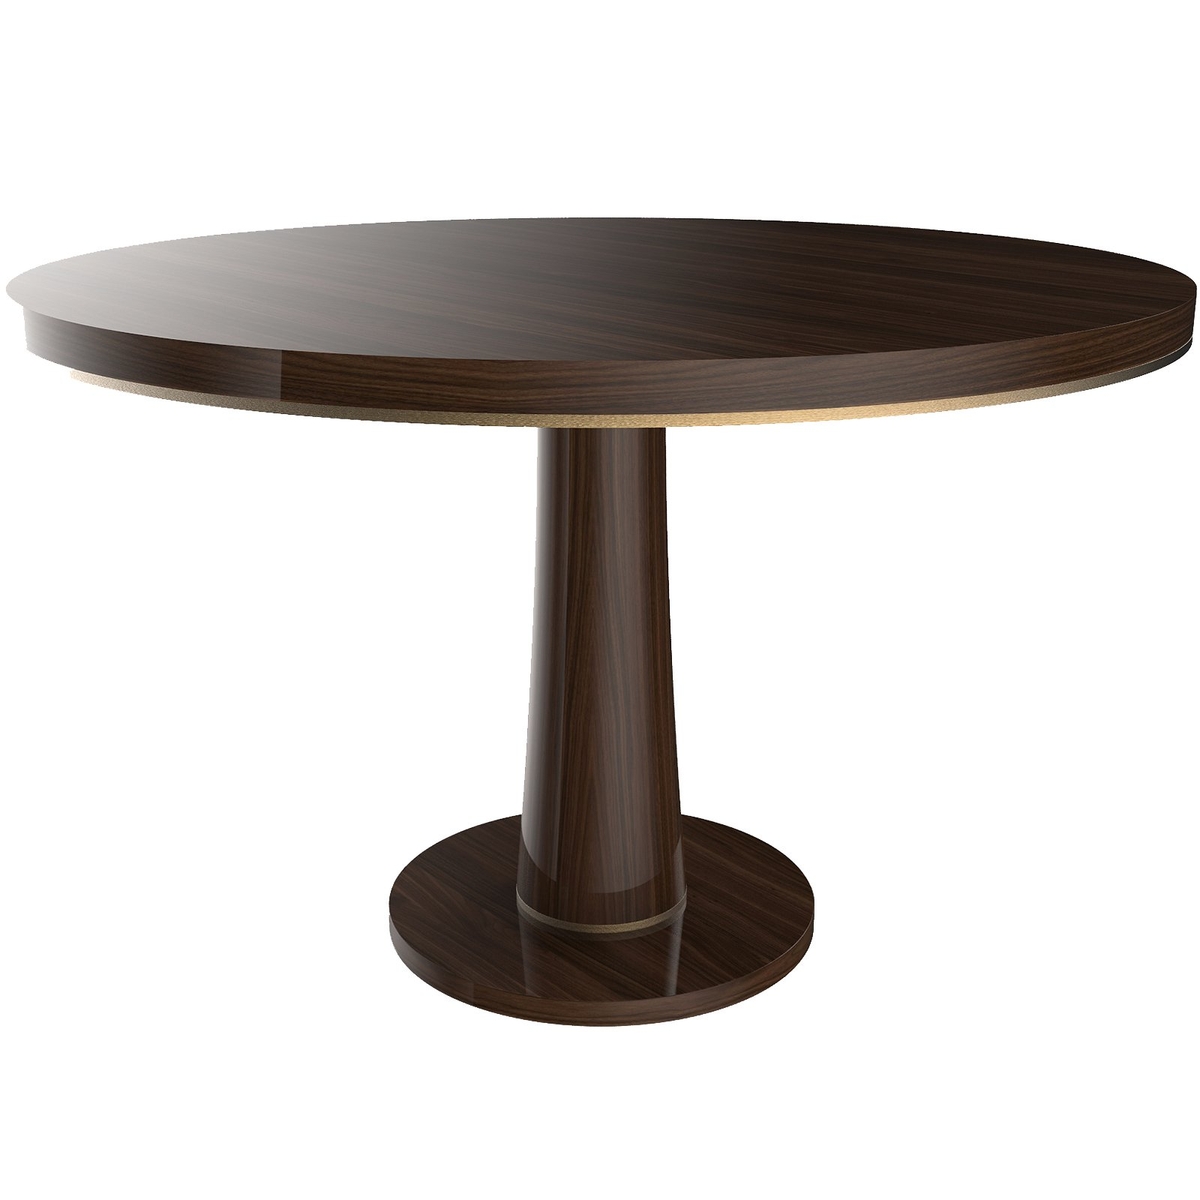 Granthan Deluxe Dining Table